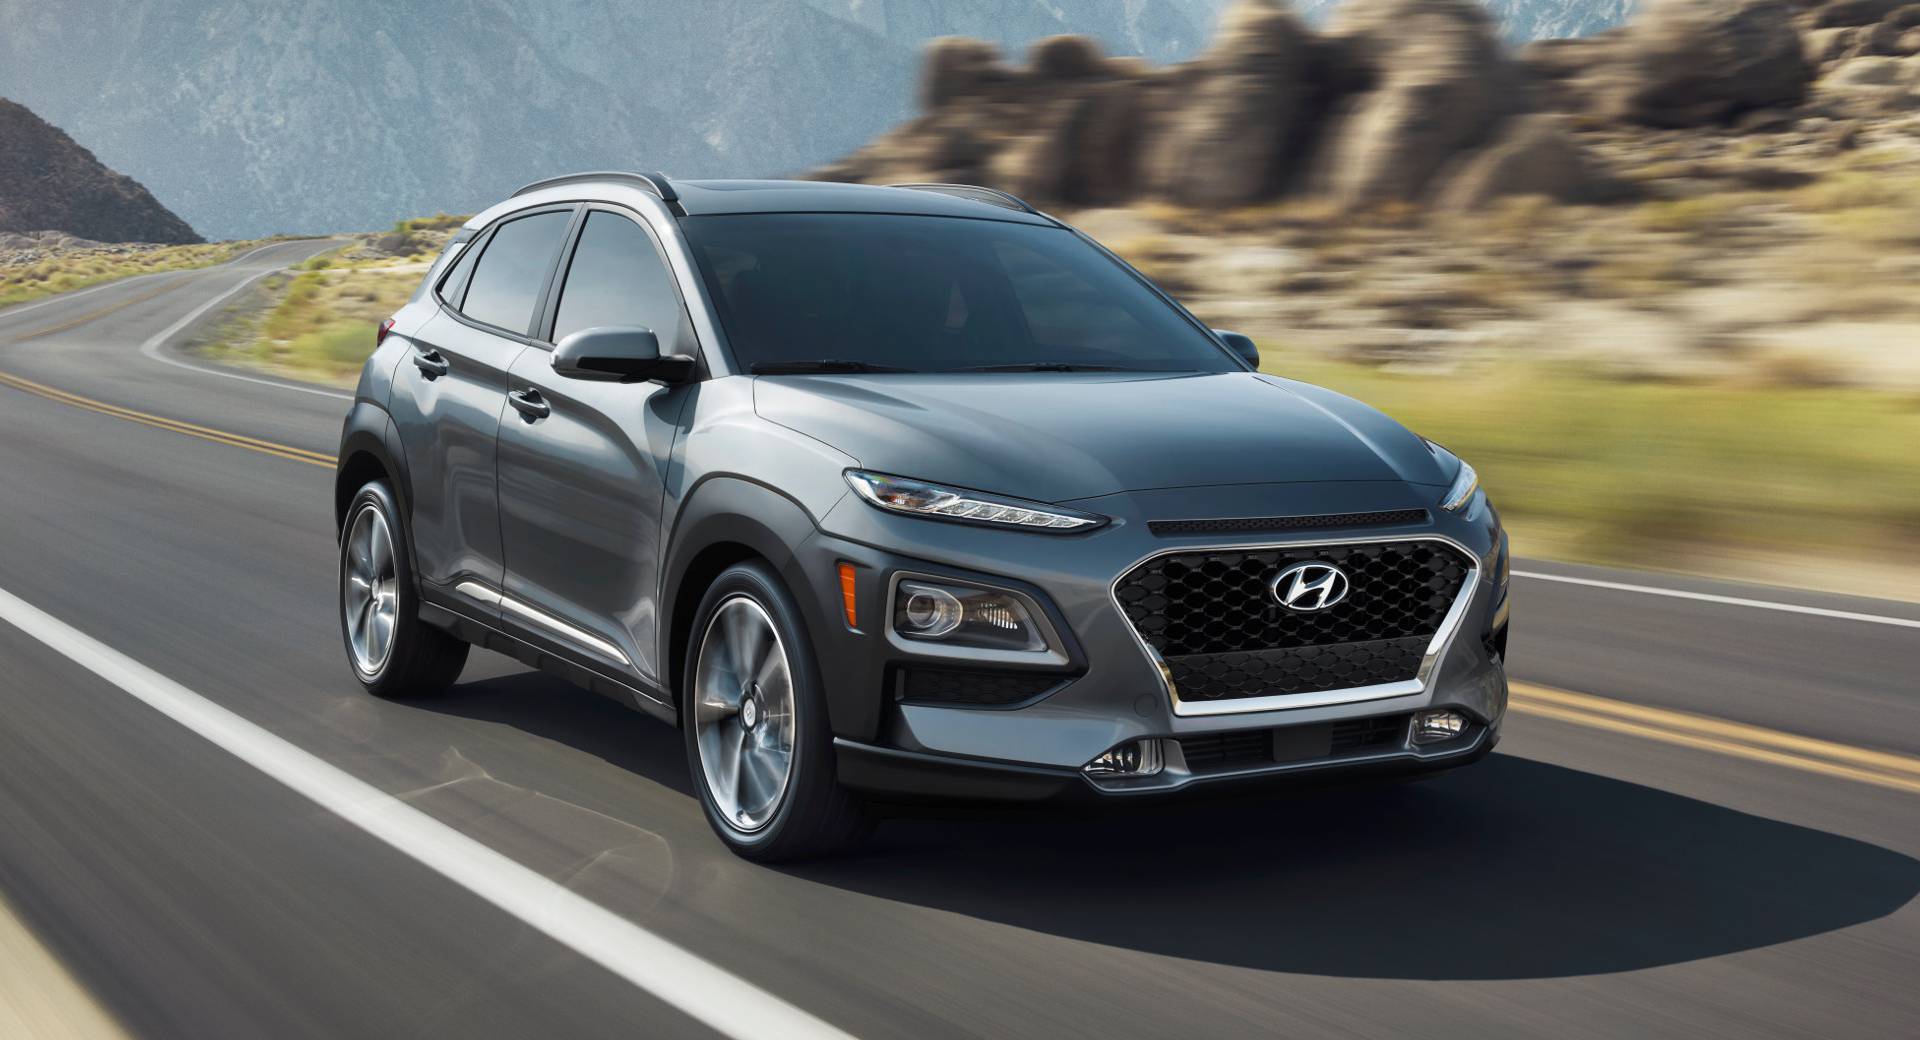 2019 Hyundai Kona Starts At $19,990, Gets More Safety Features As Standard  | Carscoops